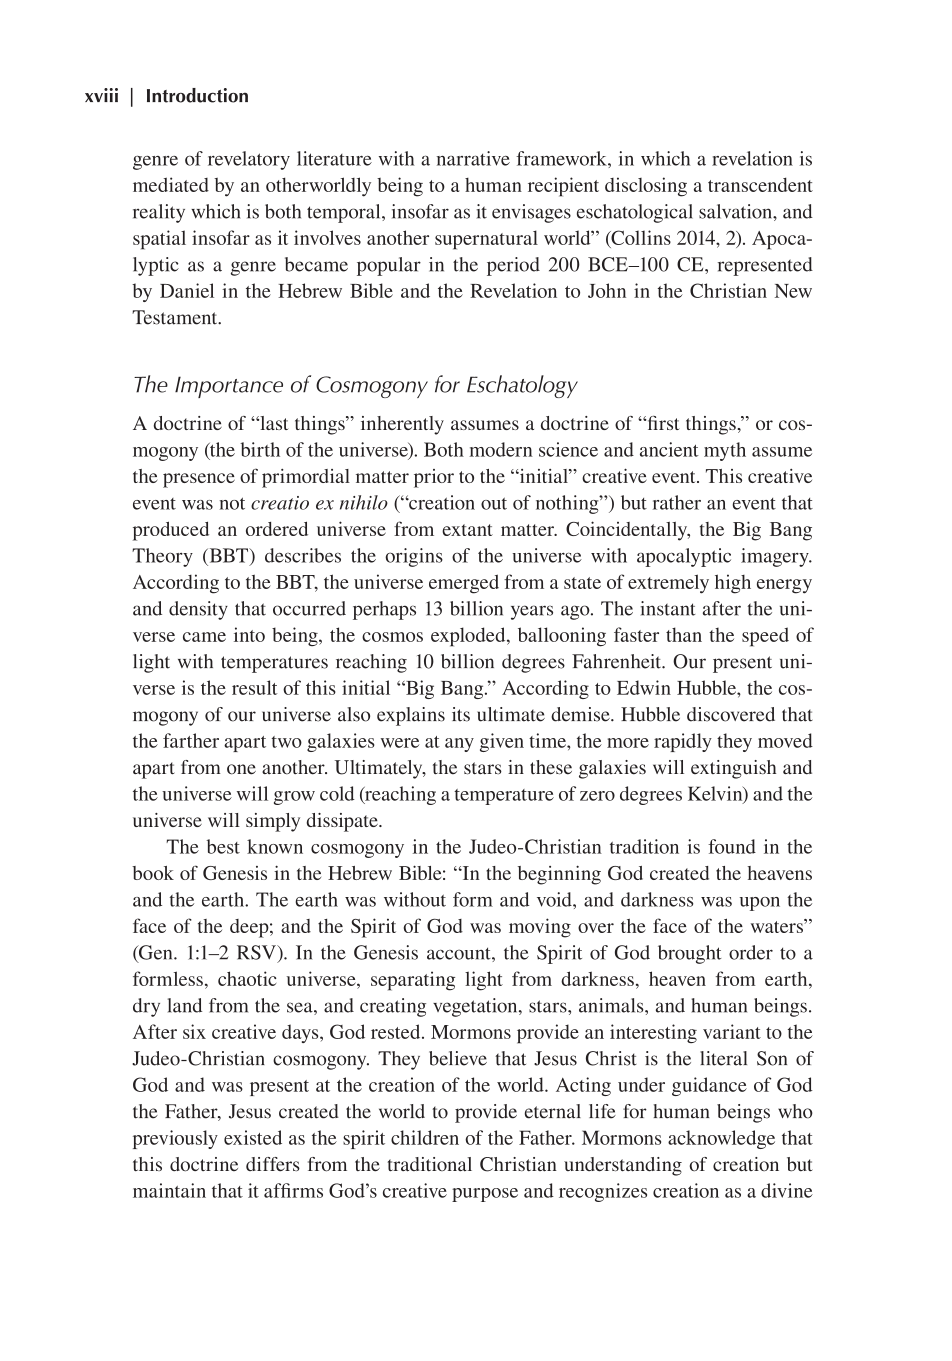 End of Days: An Encyclopedia of the Apocalypse in World Religions page xviii